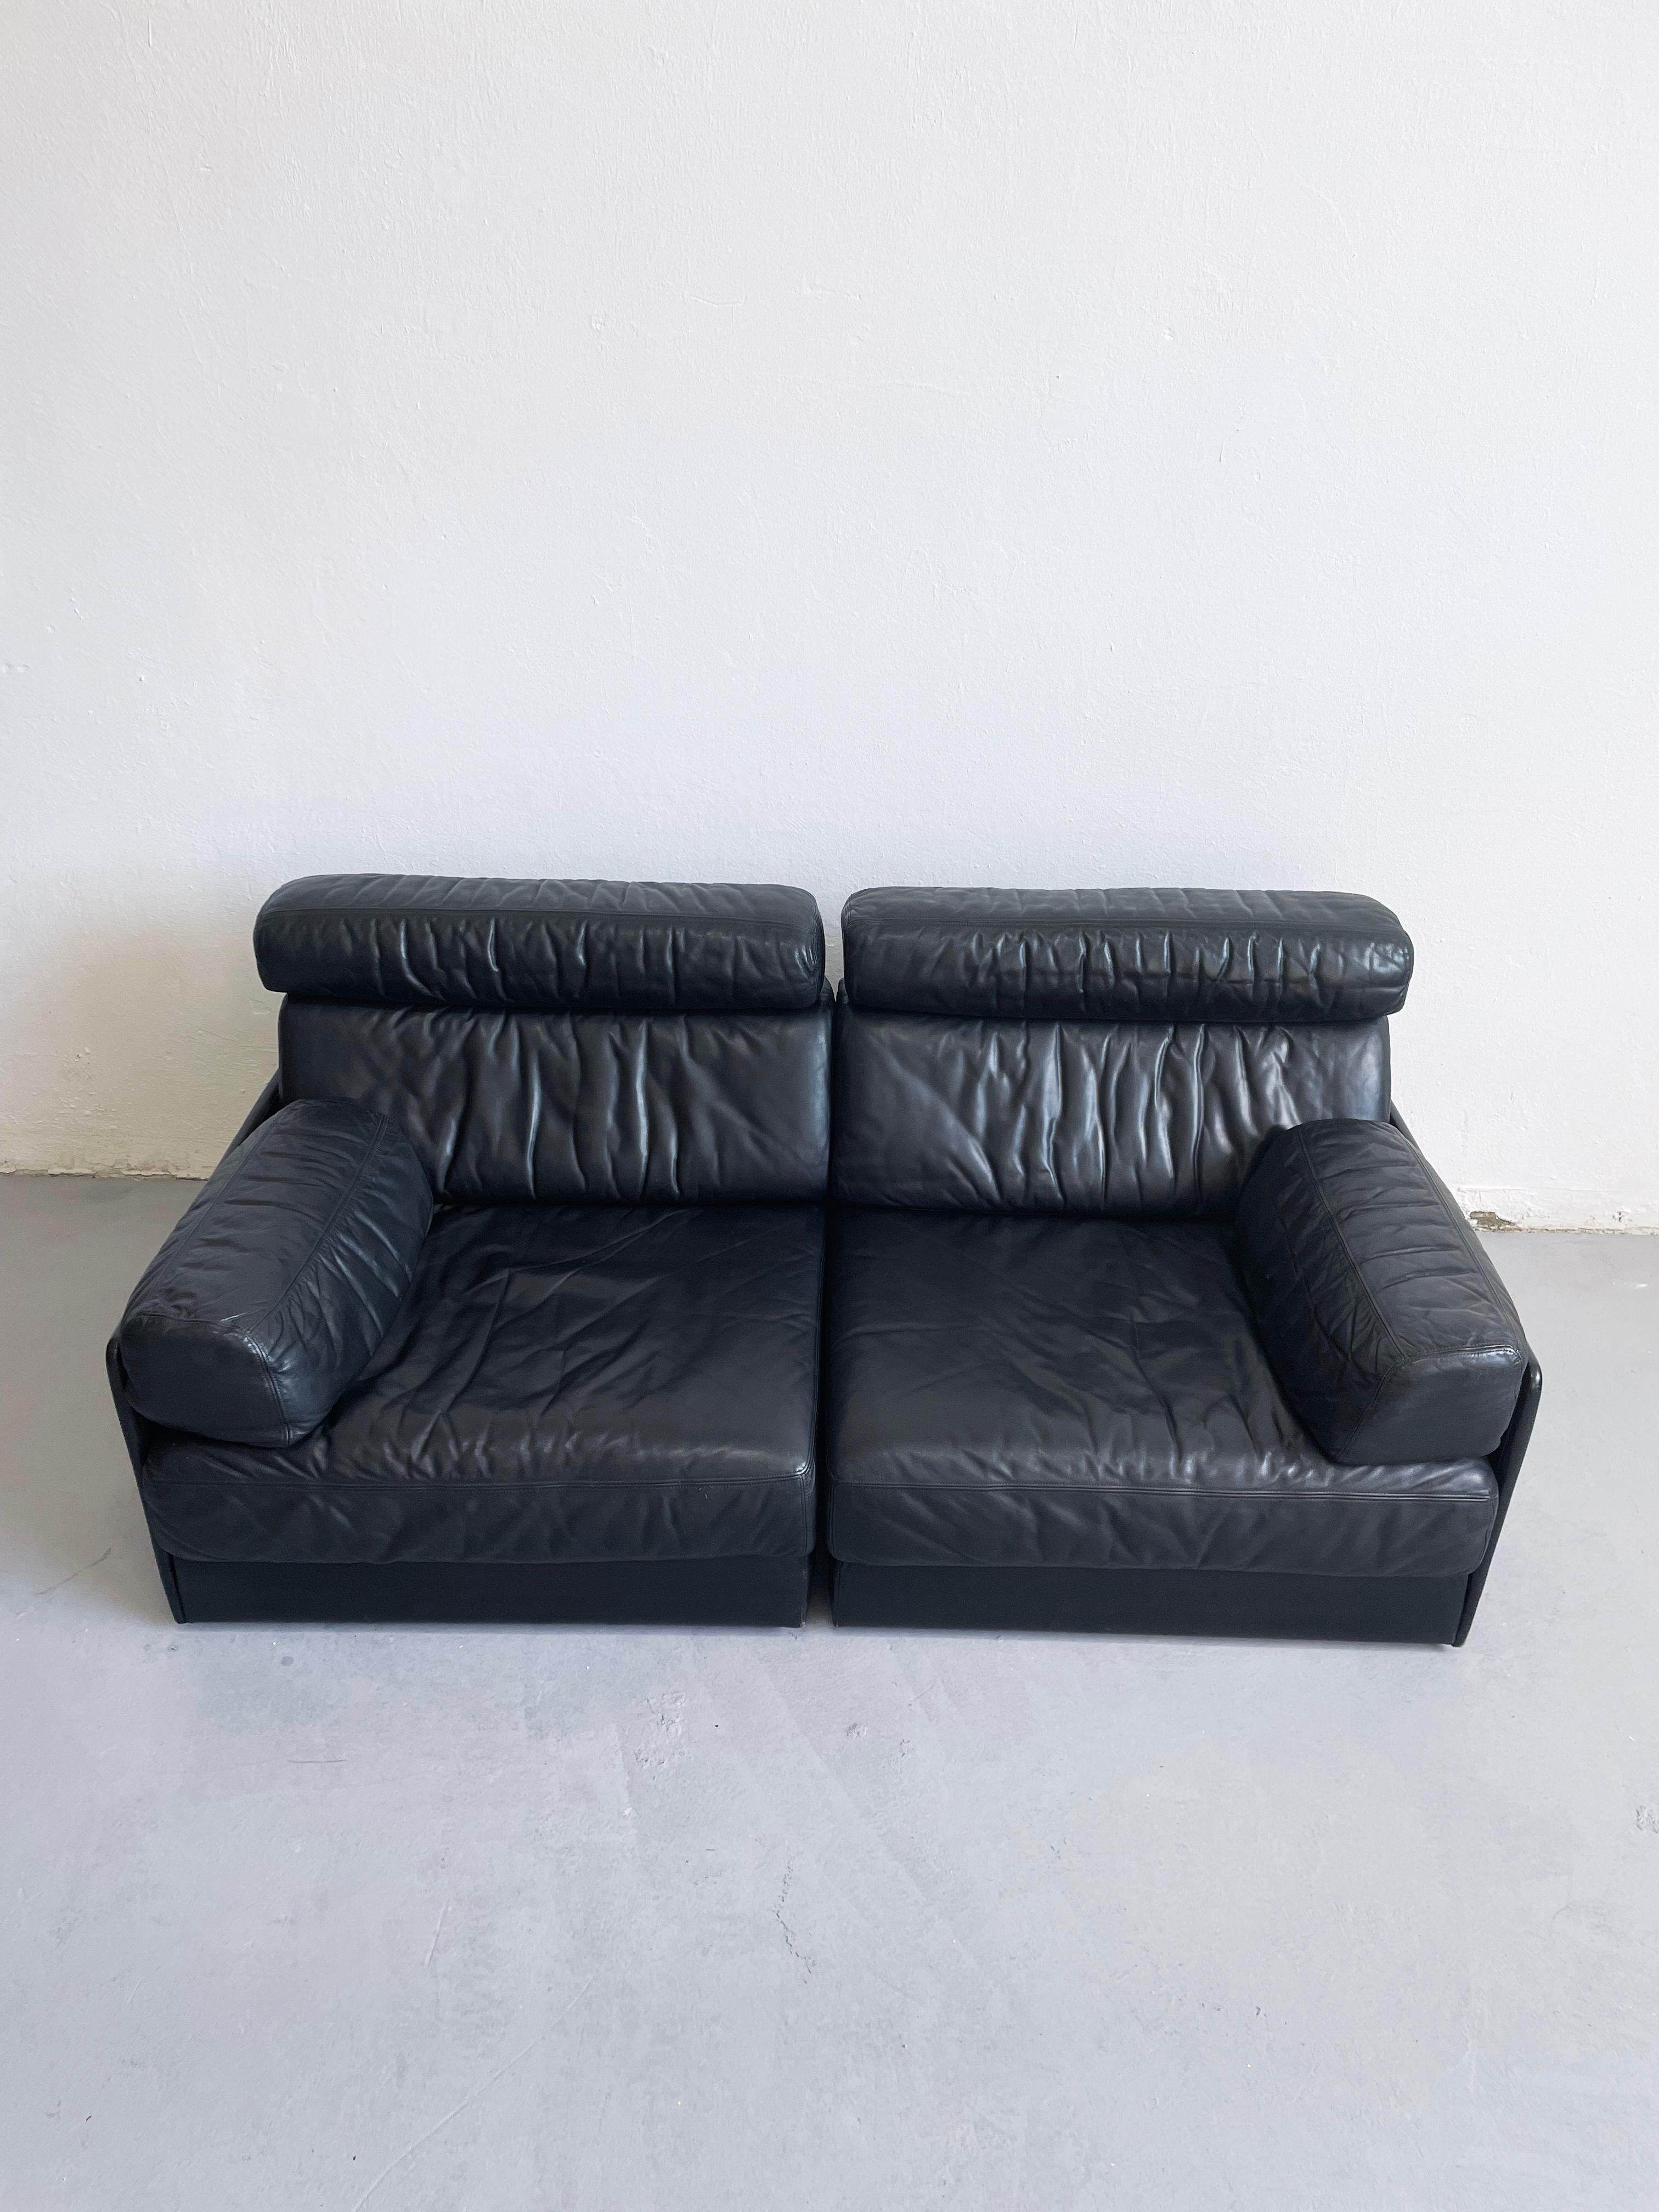 Swiss Vintage De Sede Modular Two Seater 'DS-77' Sofa Bed in Black Leather